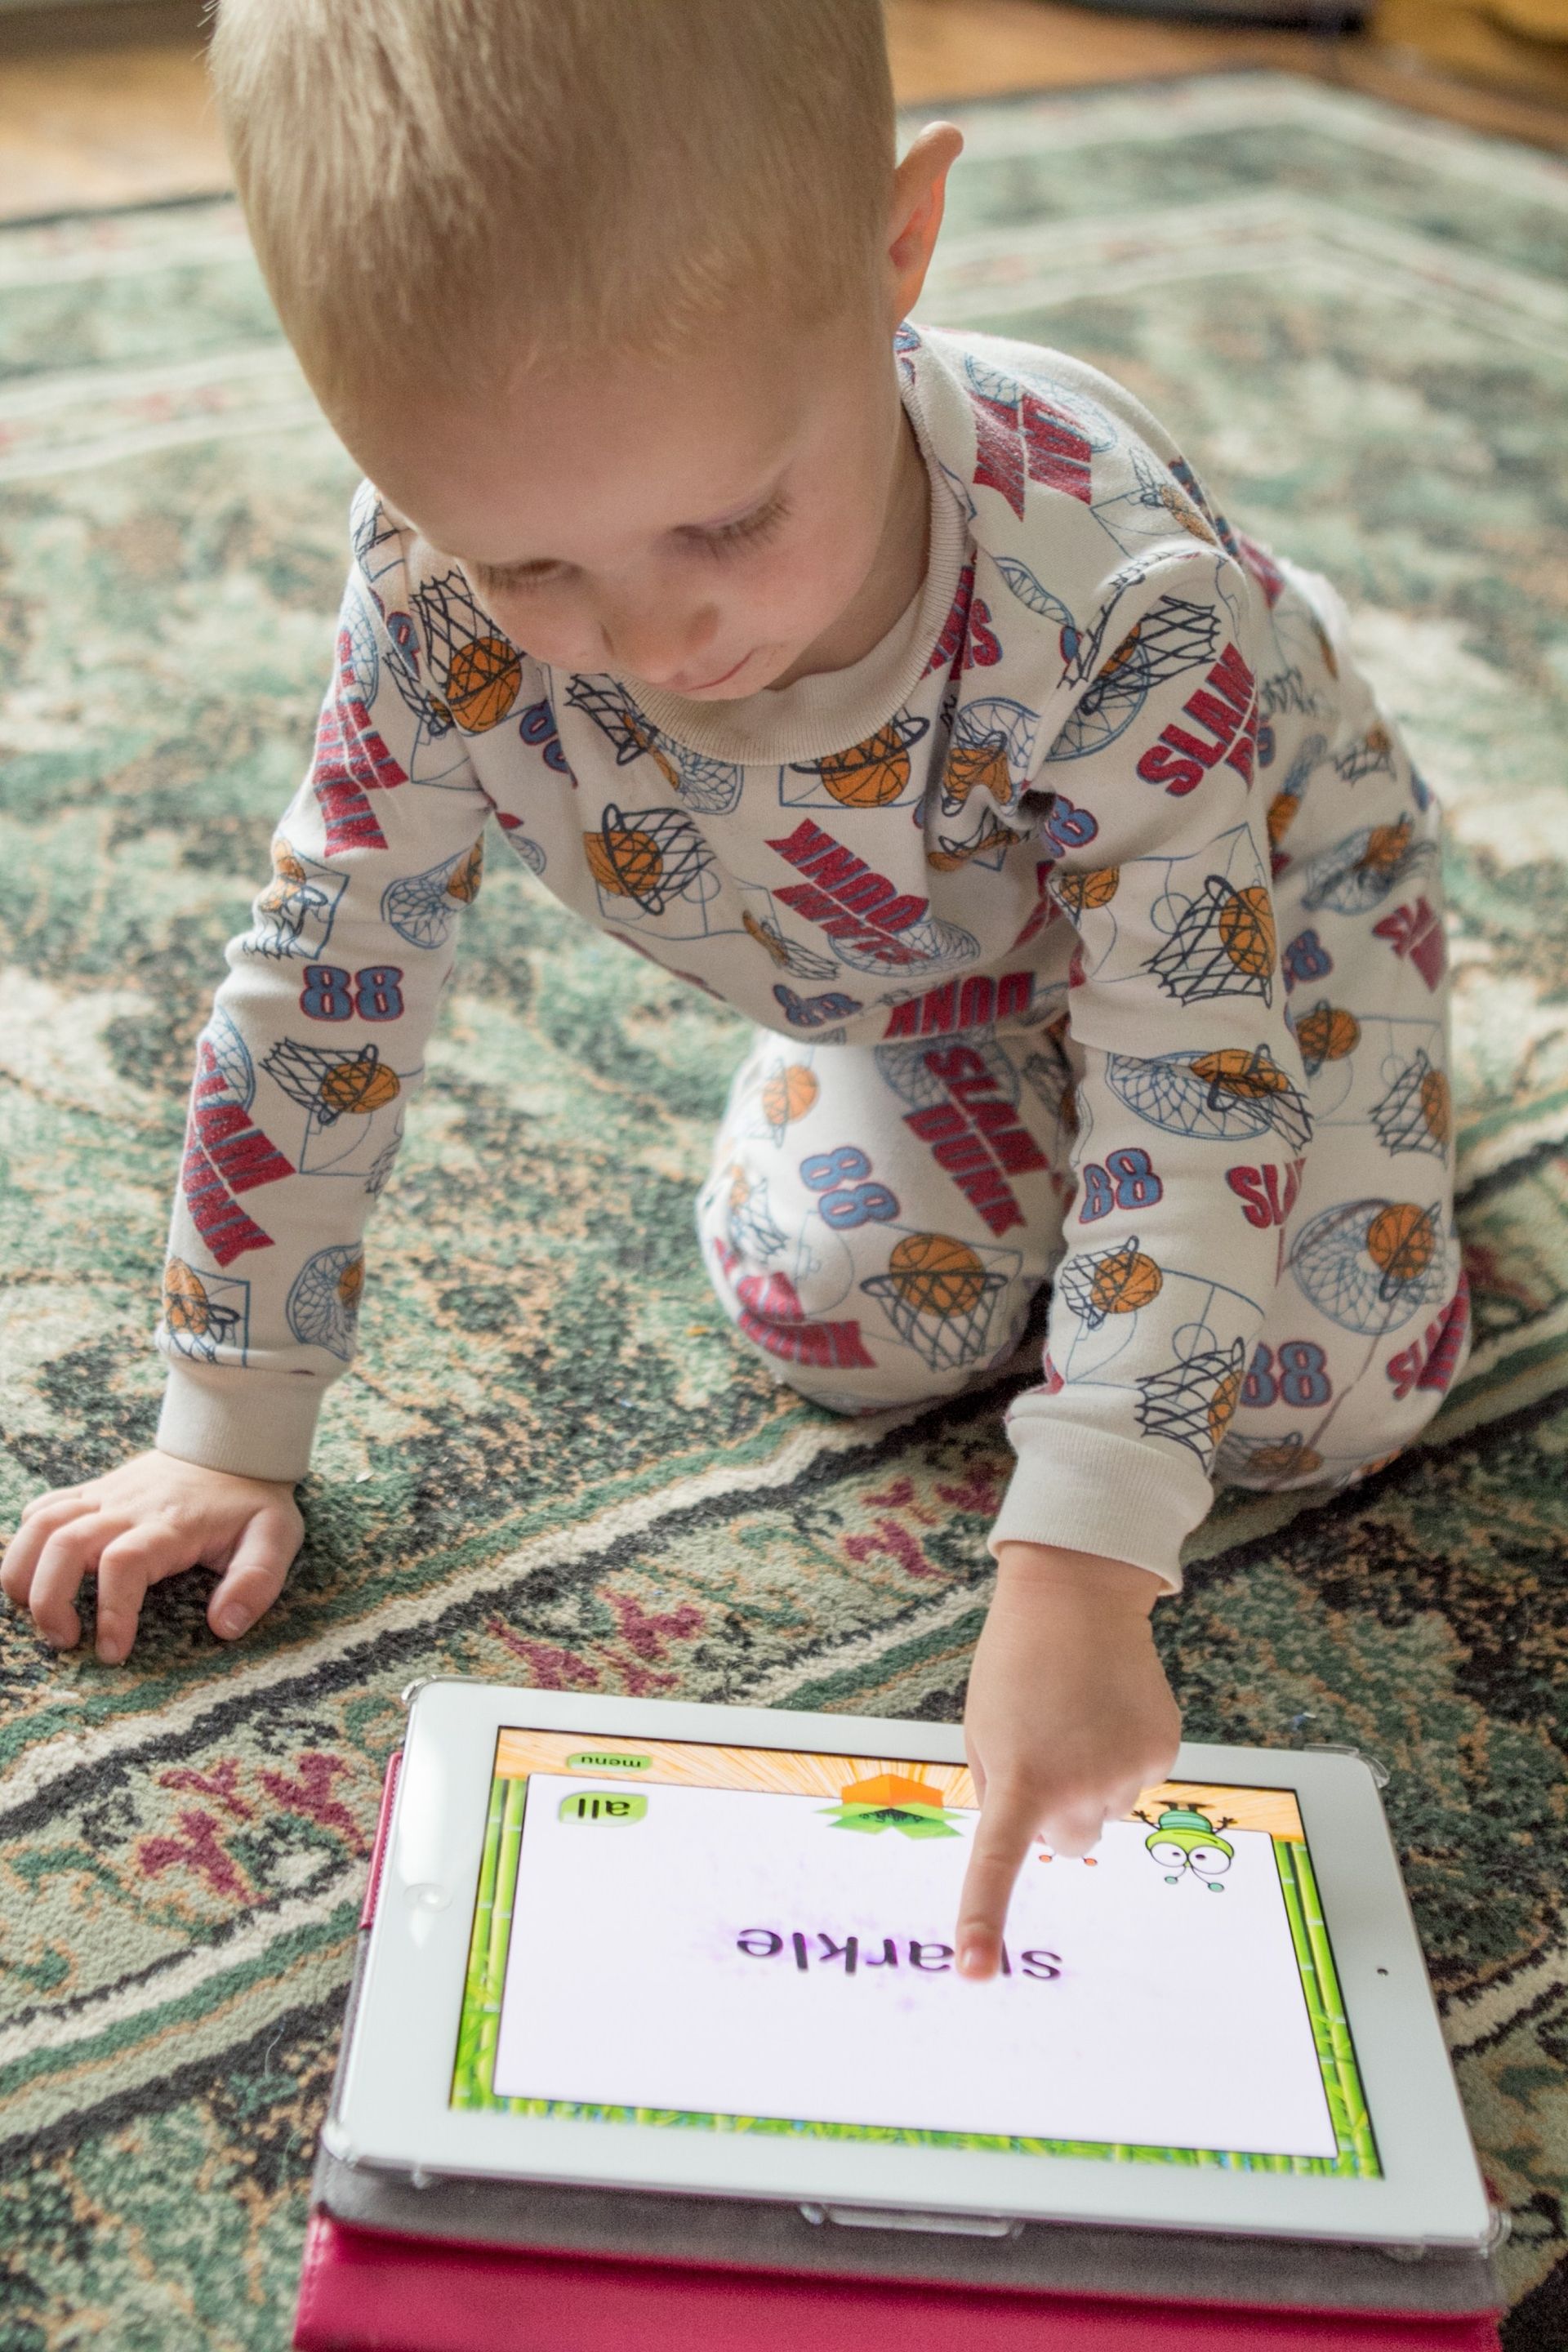 A baby plays a game on a tablet.